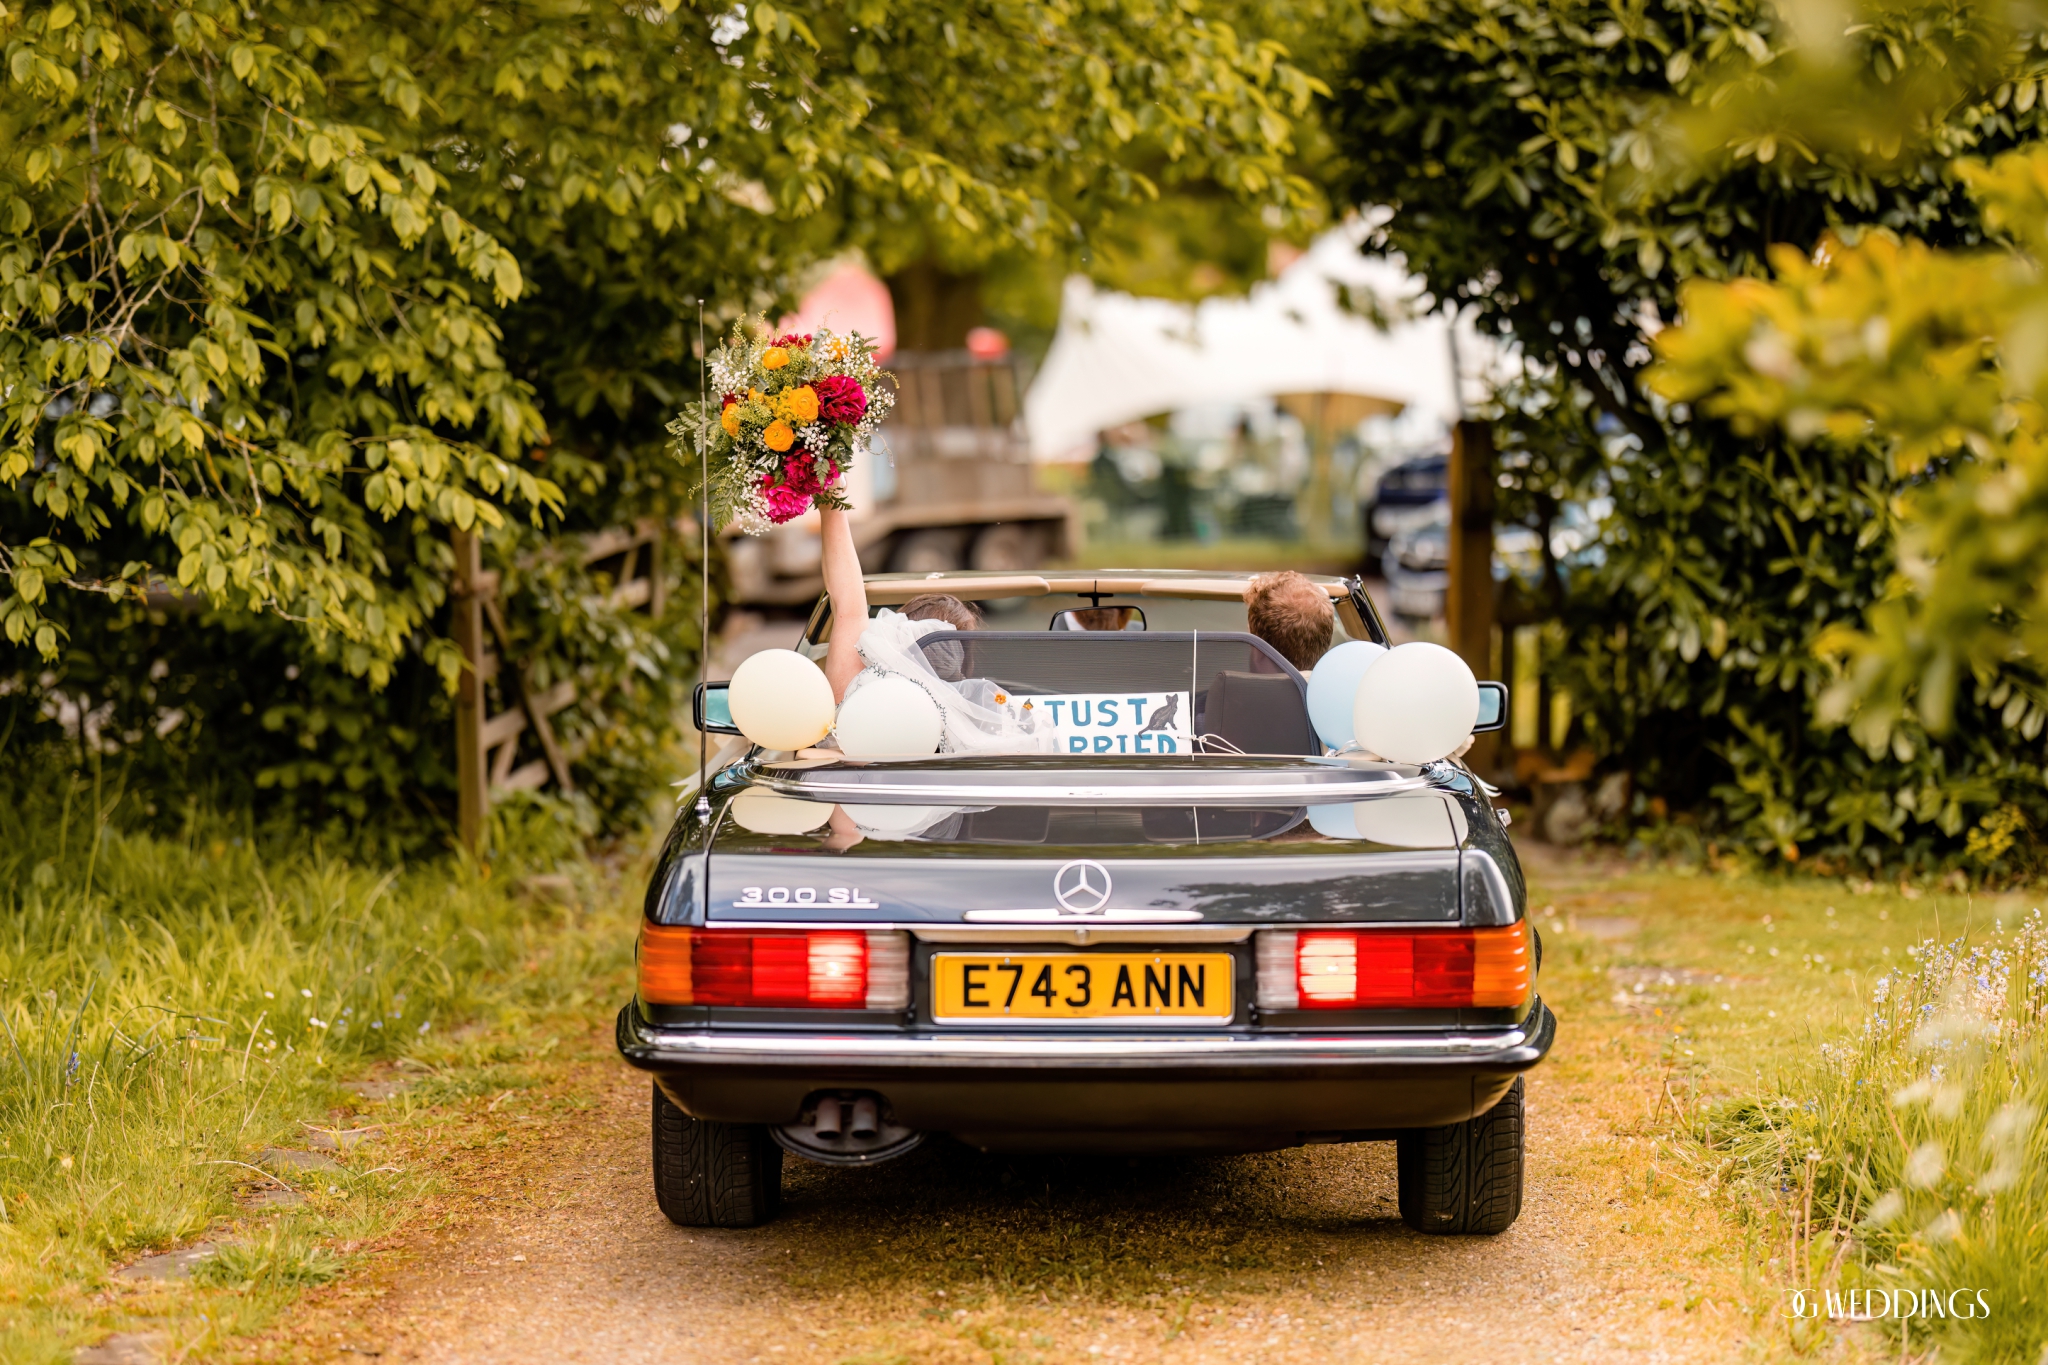 Marbella bride and groom drives away from wedding with just married sign and old mercedes